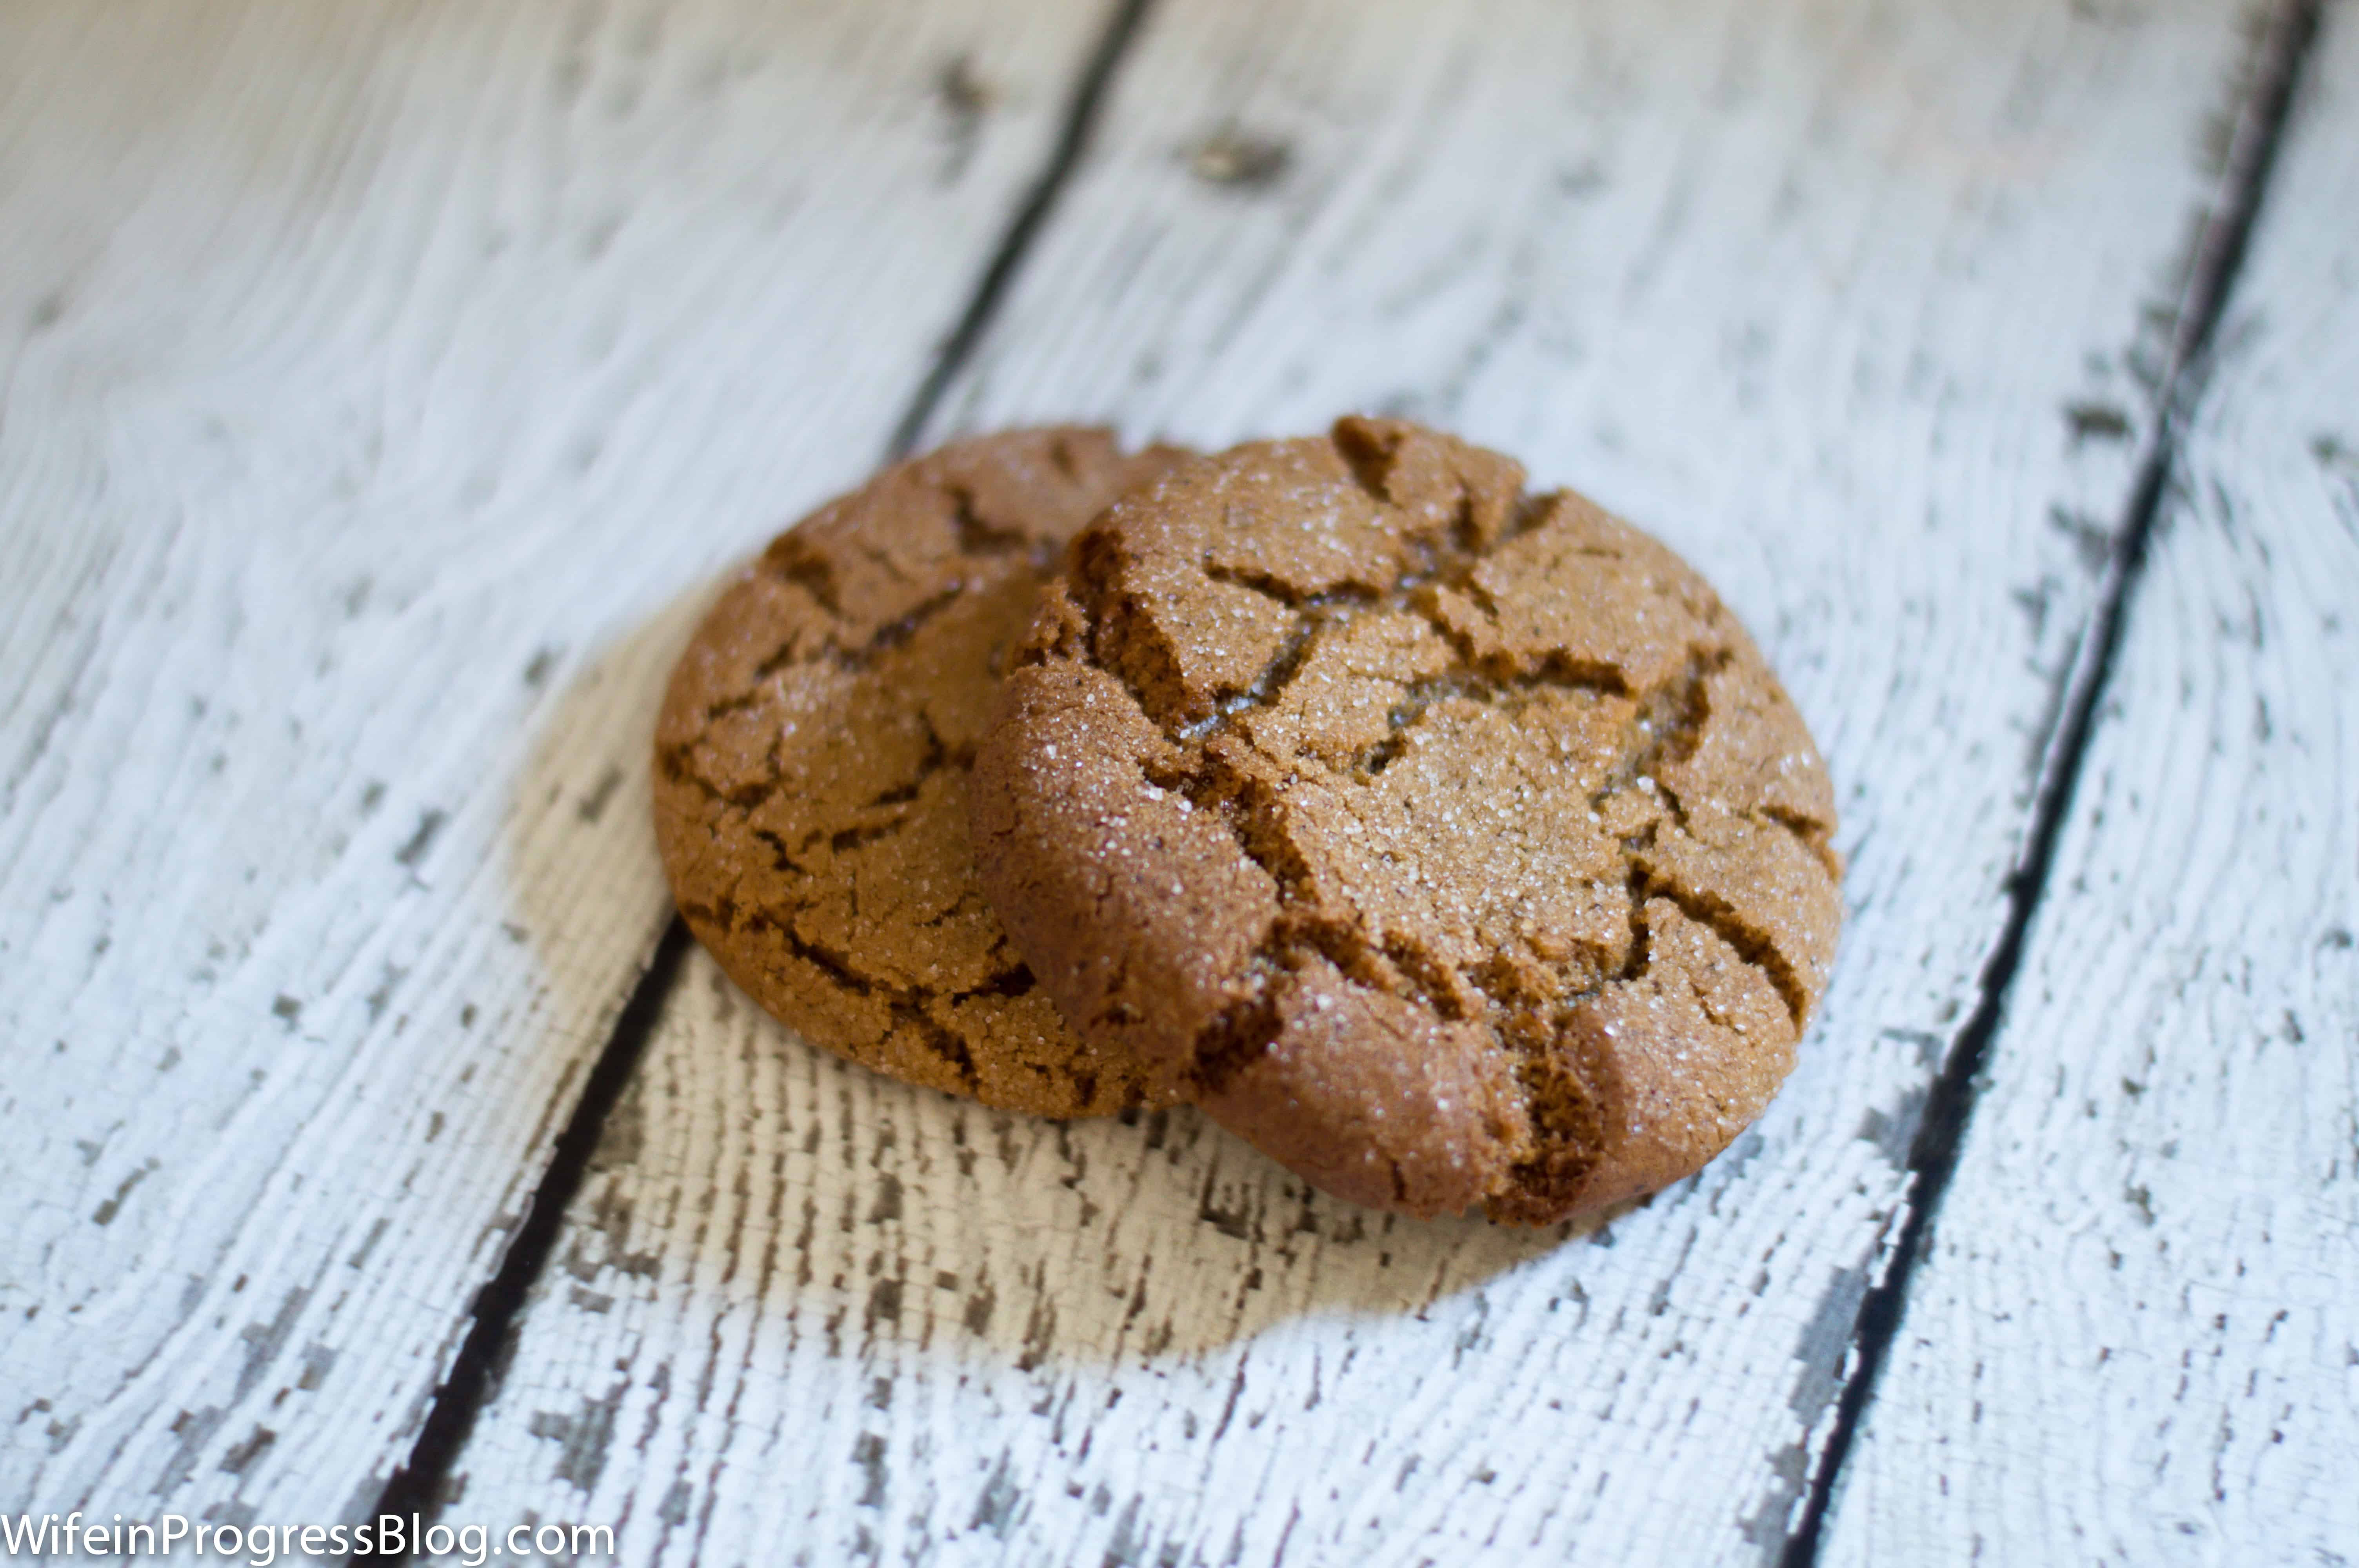 This recipe for gingersnap cookies is made without butter or shortening but still has that crunch outside and chewy inside you want.